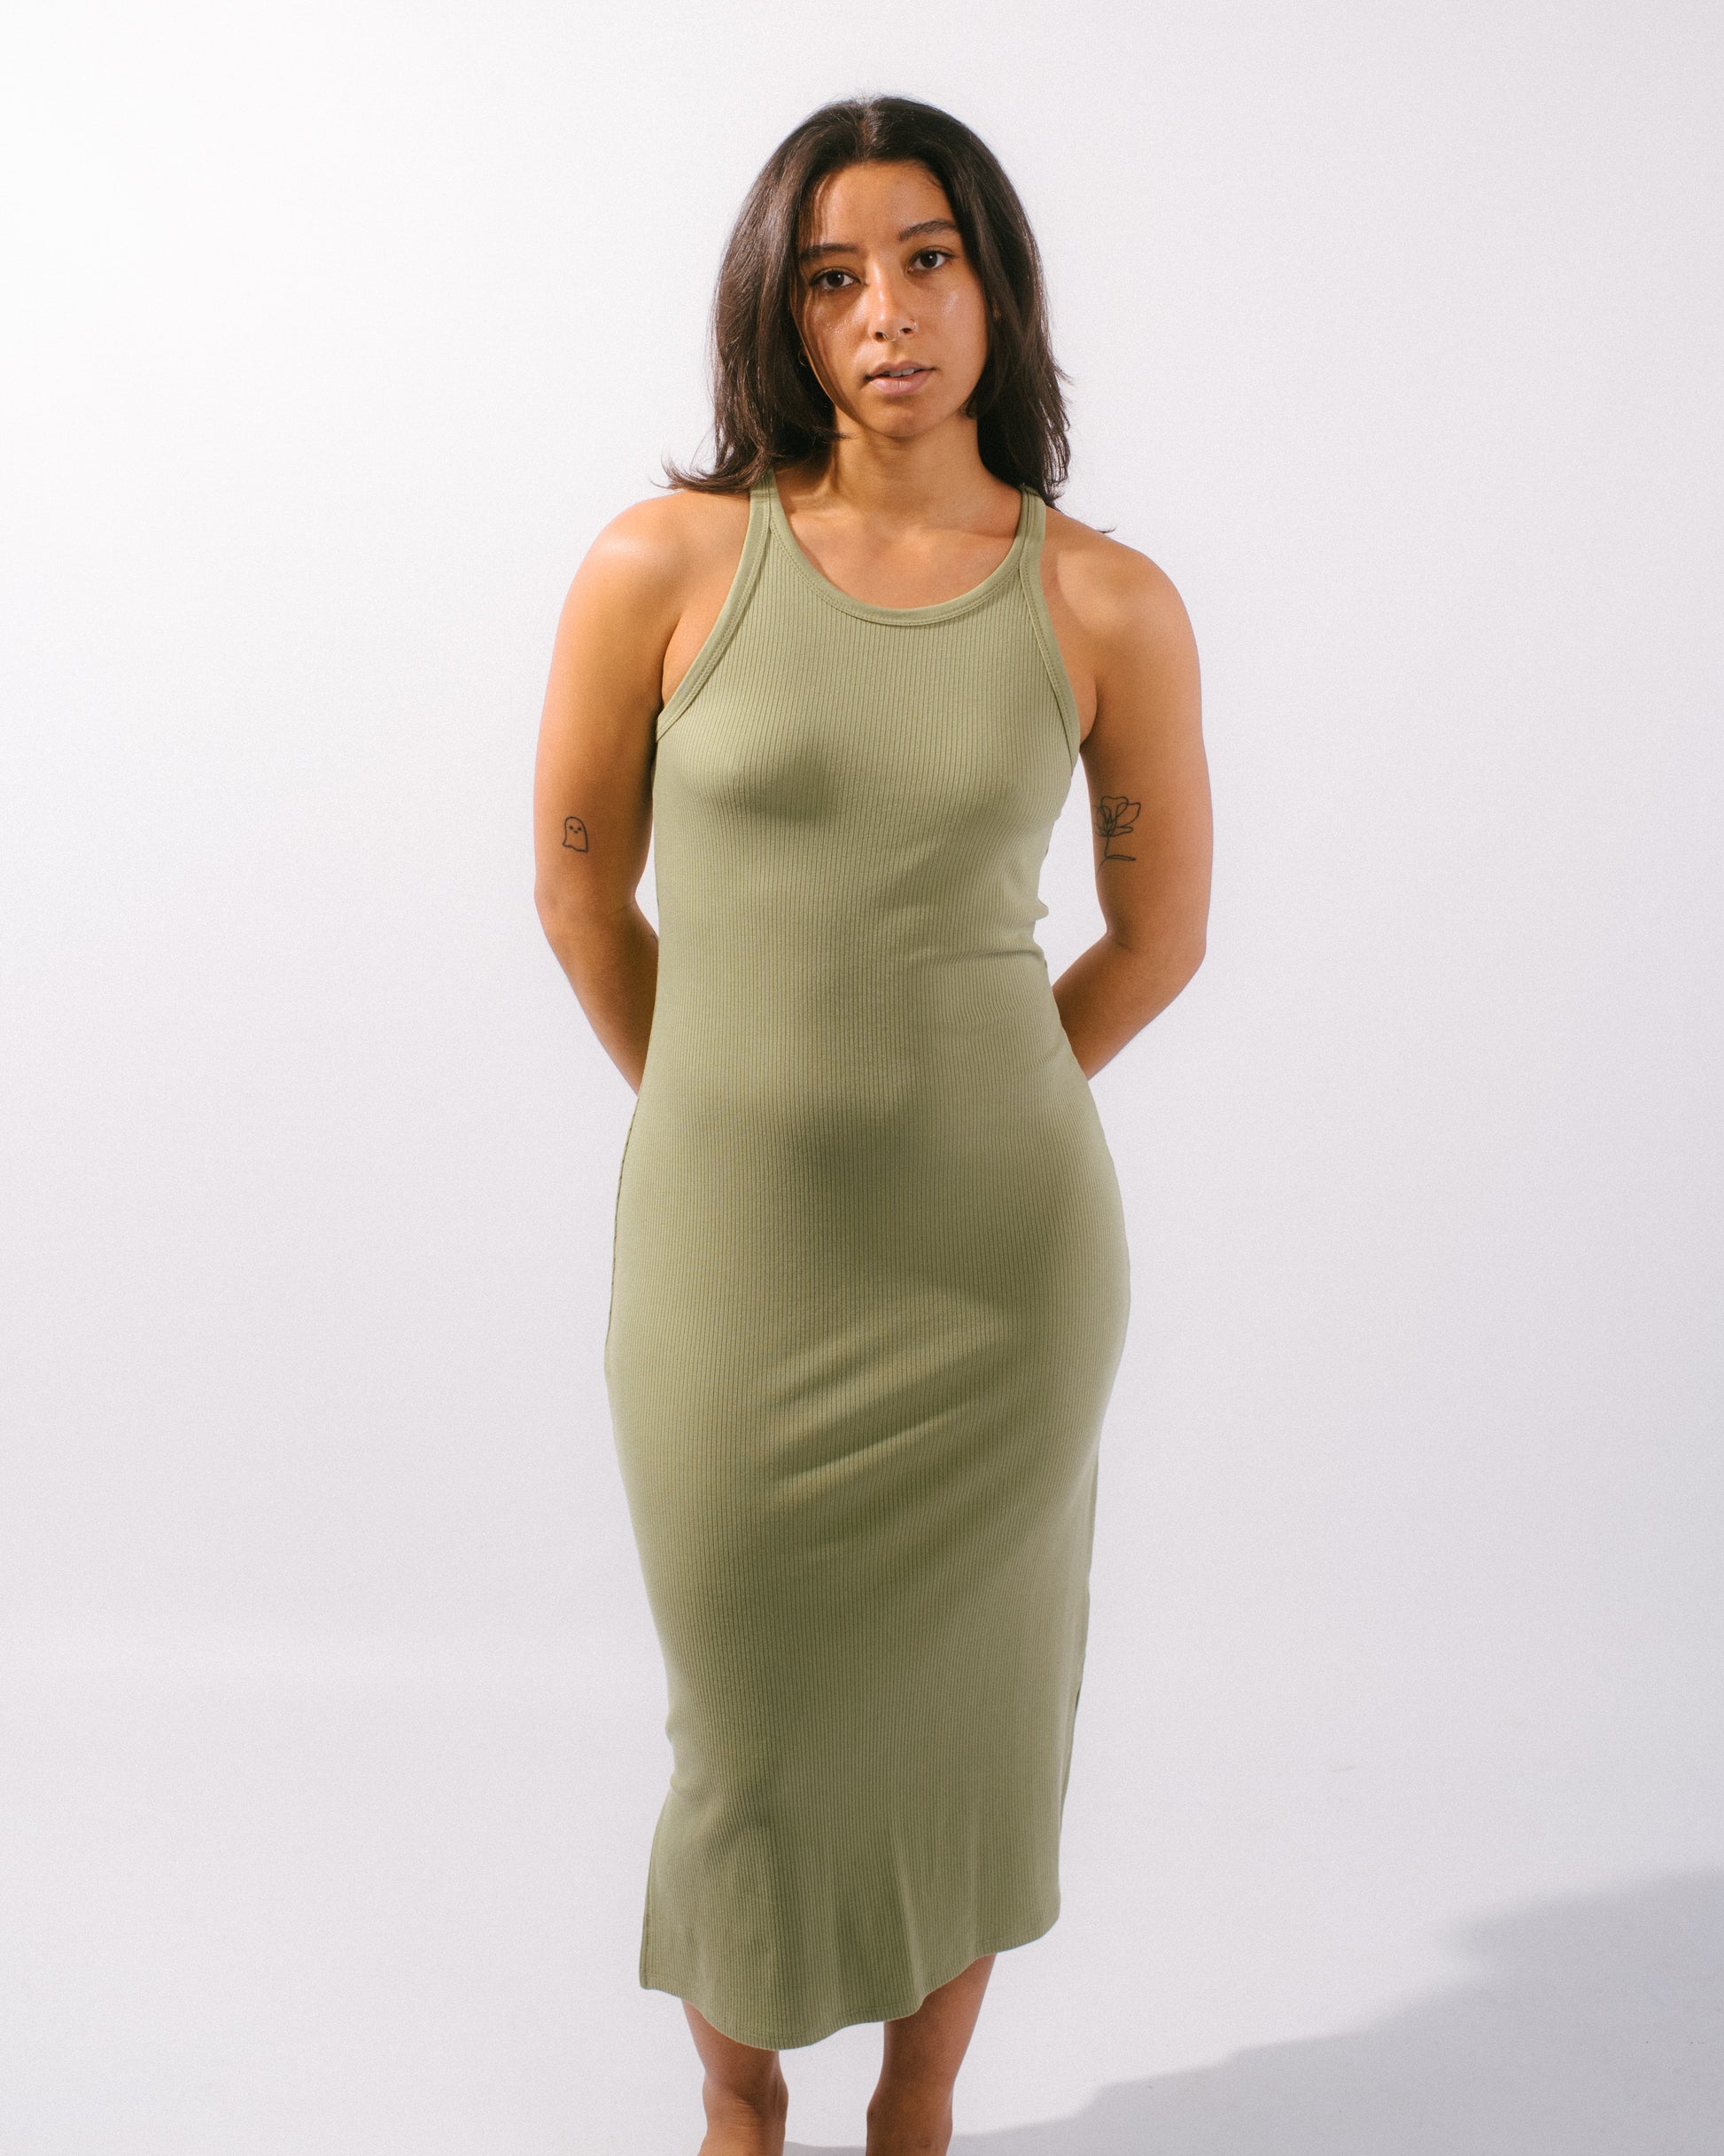 vintage ribbed midi dress in green fatigues on model